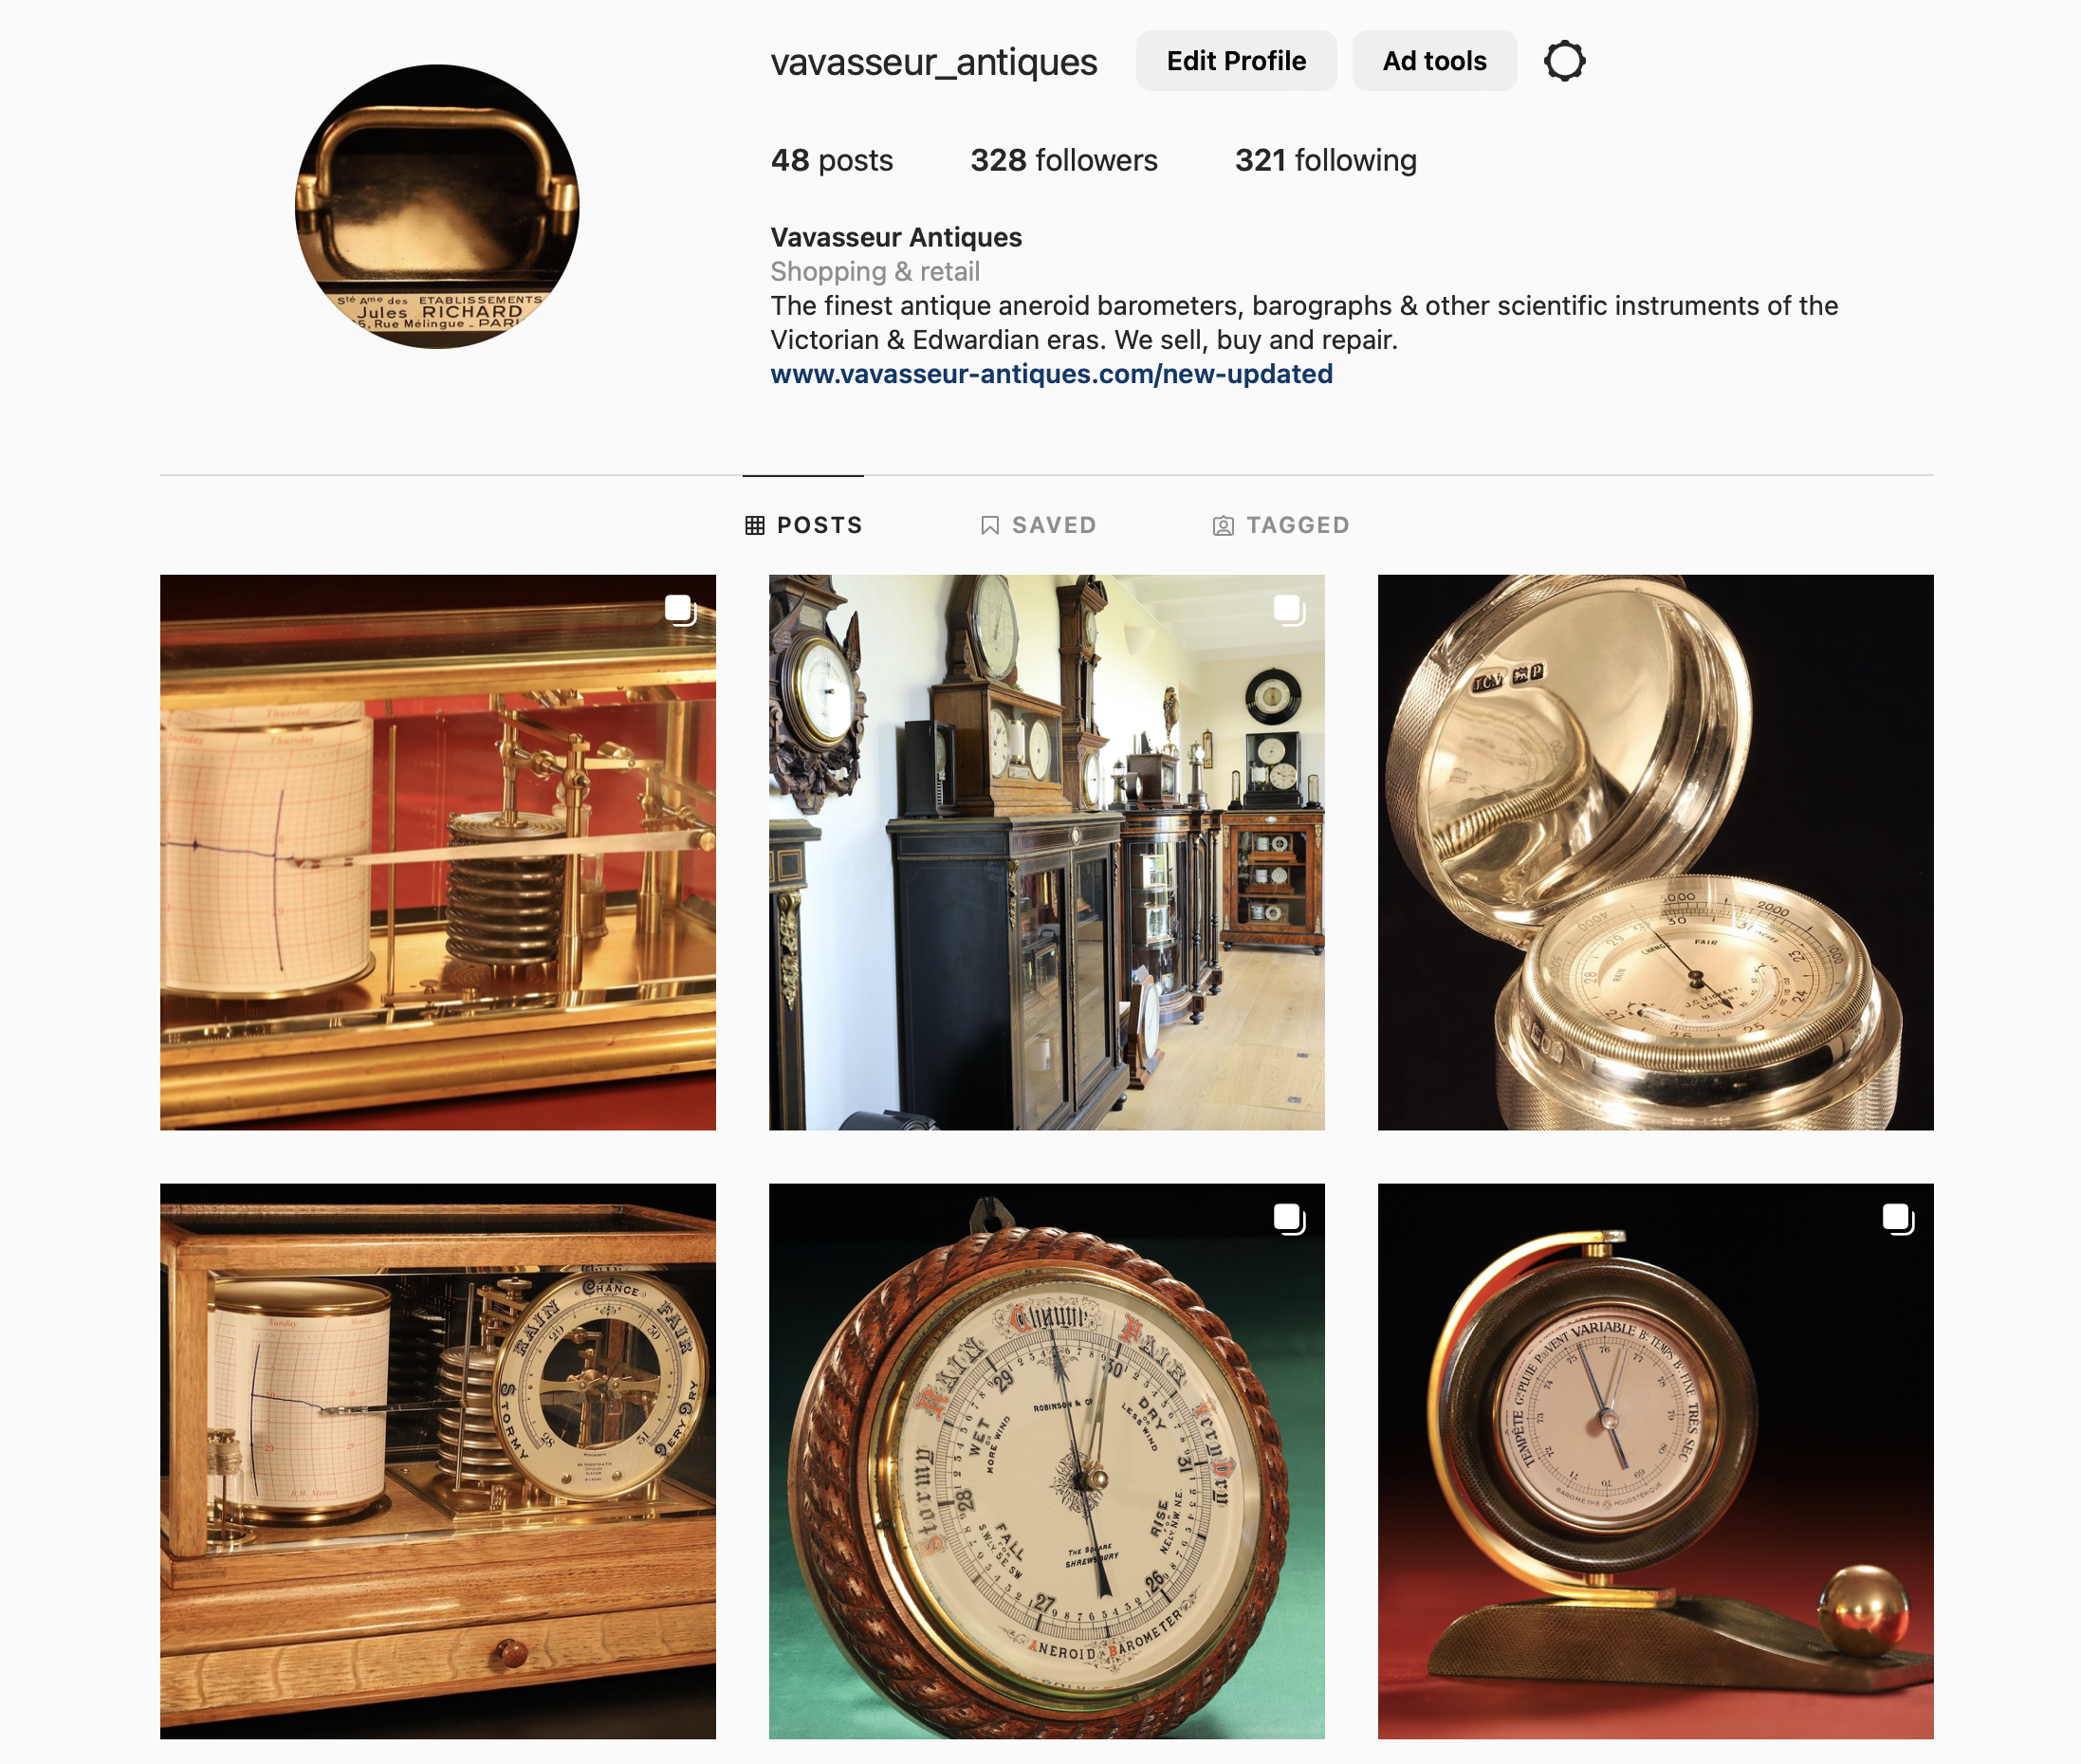 Vavasseur Antiques is now on Twitter, Instagram and Facebook!